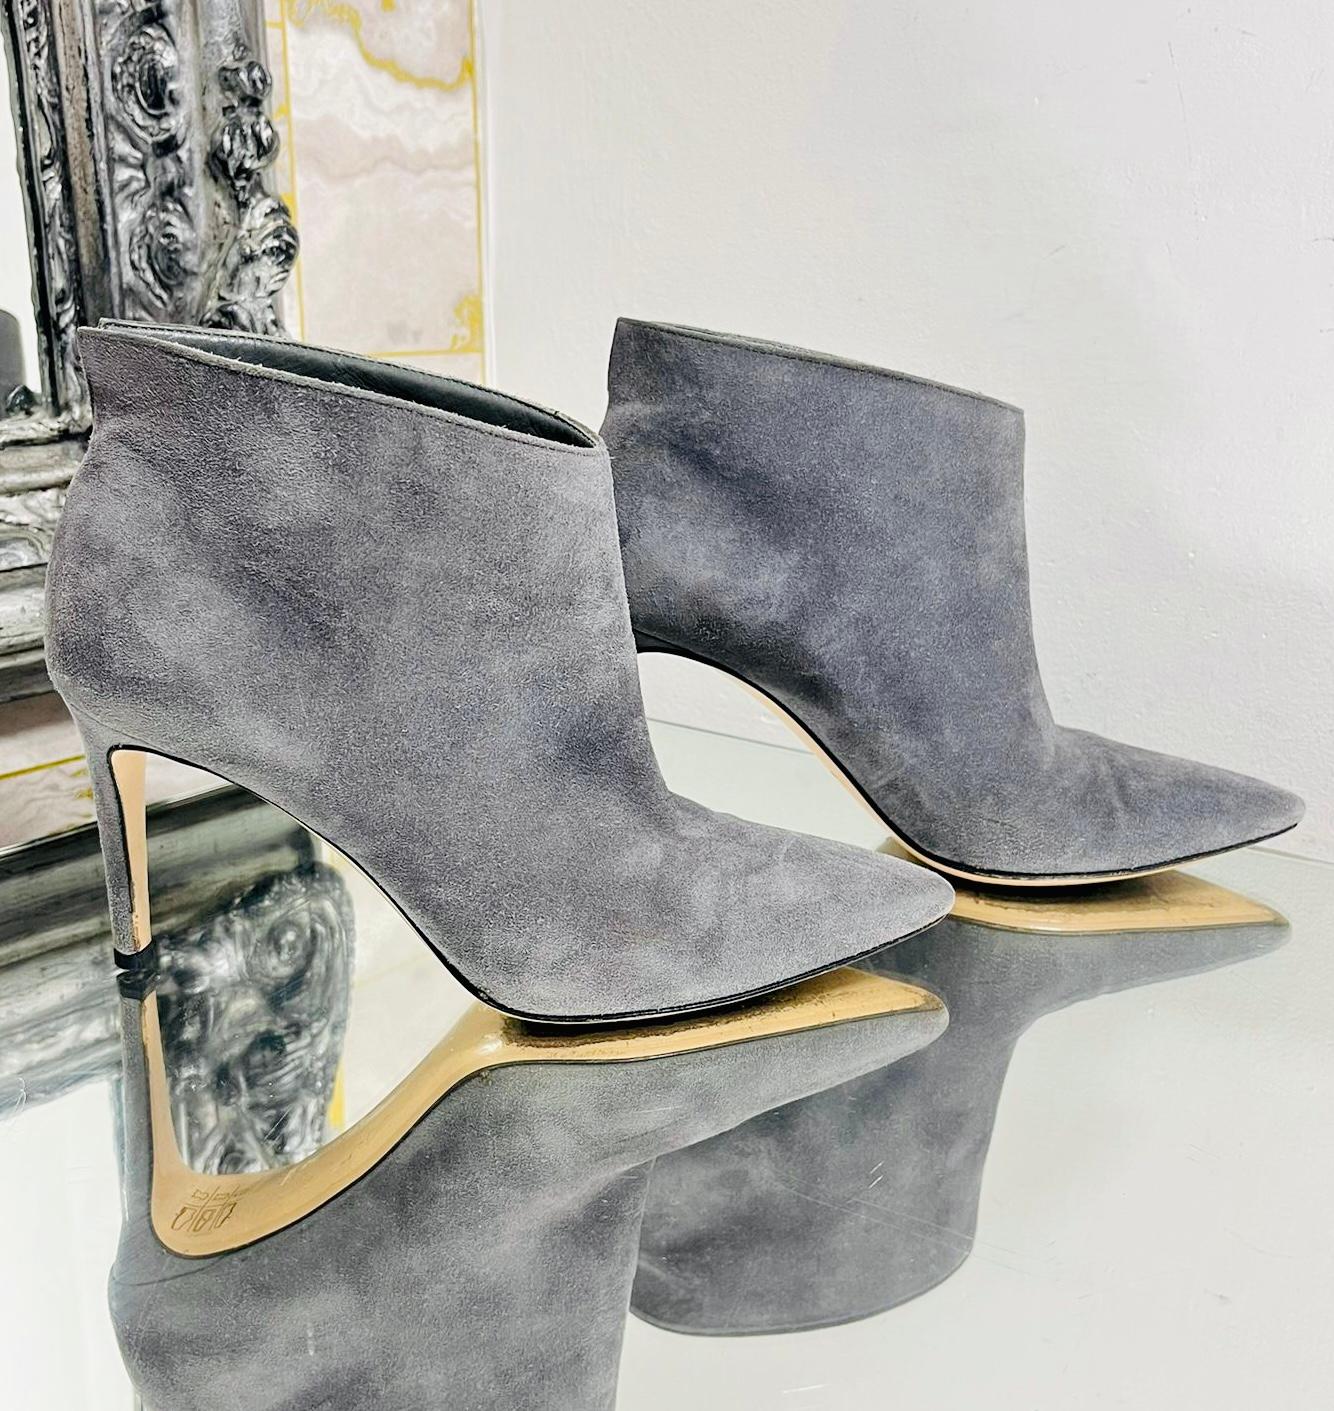 Gianvito Rossi Suede Ankle Boots In Good Condition For Sale In London, GB